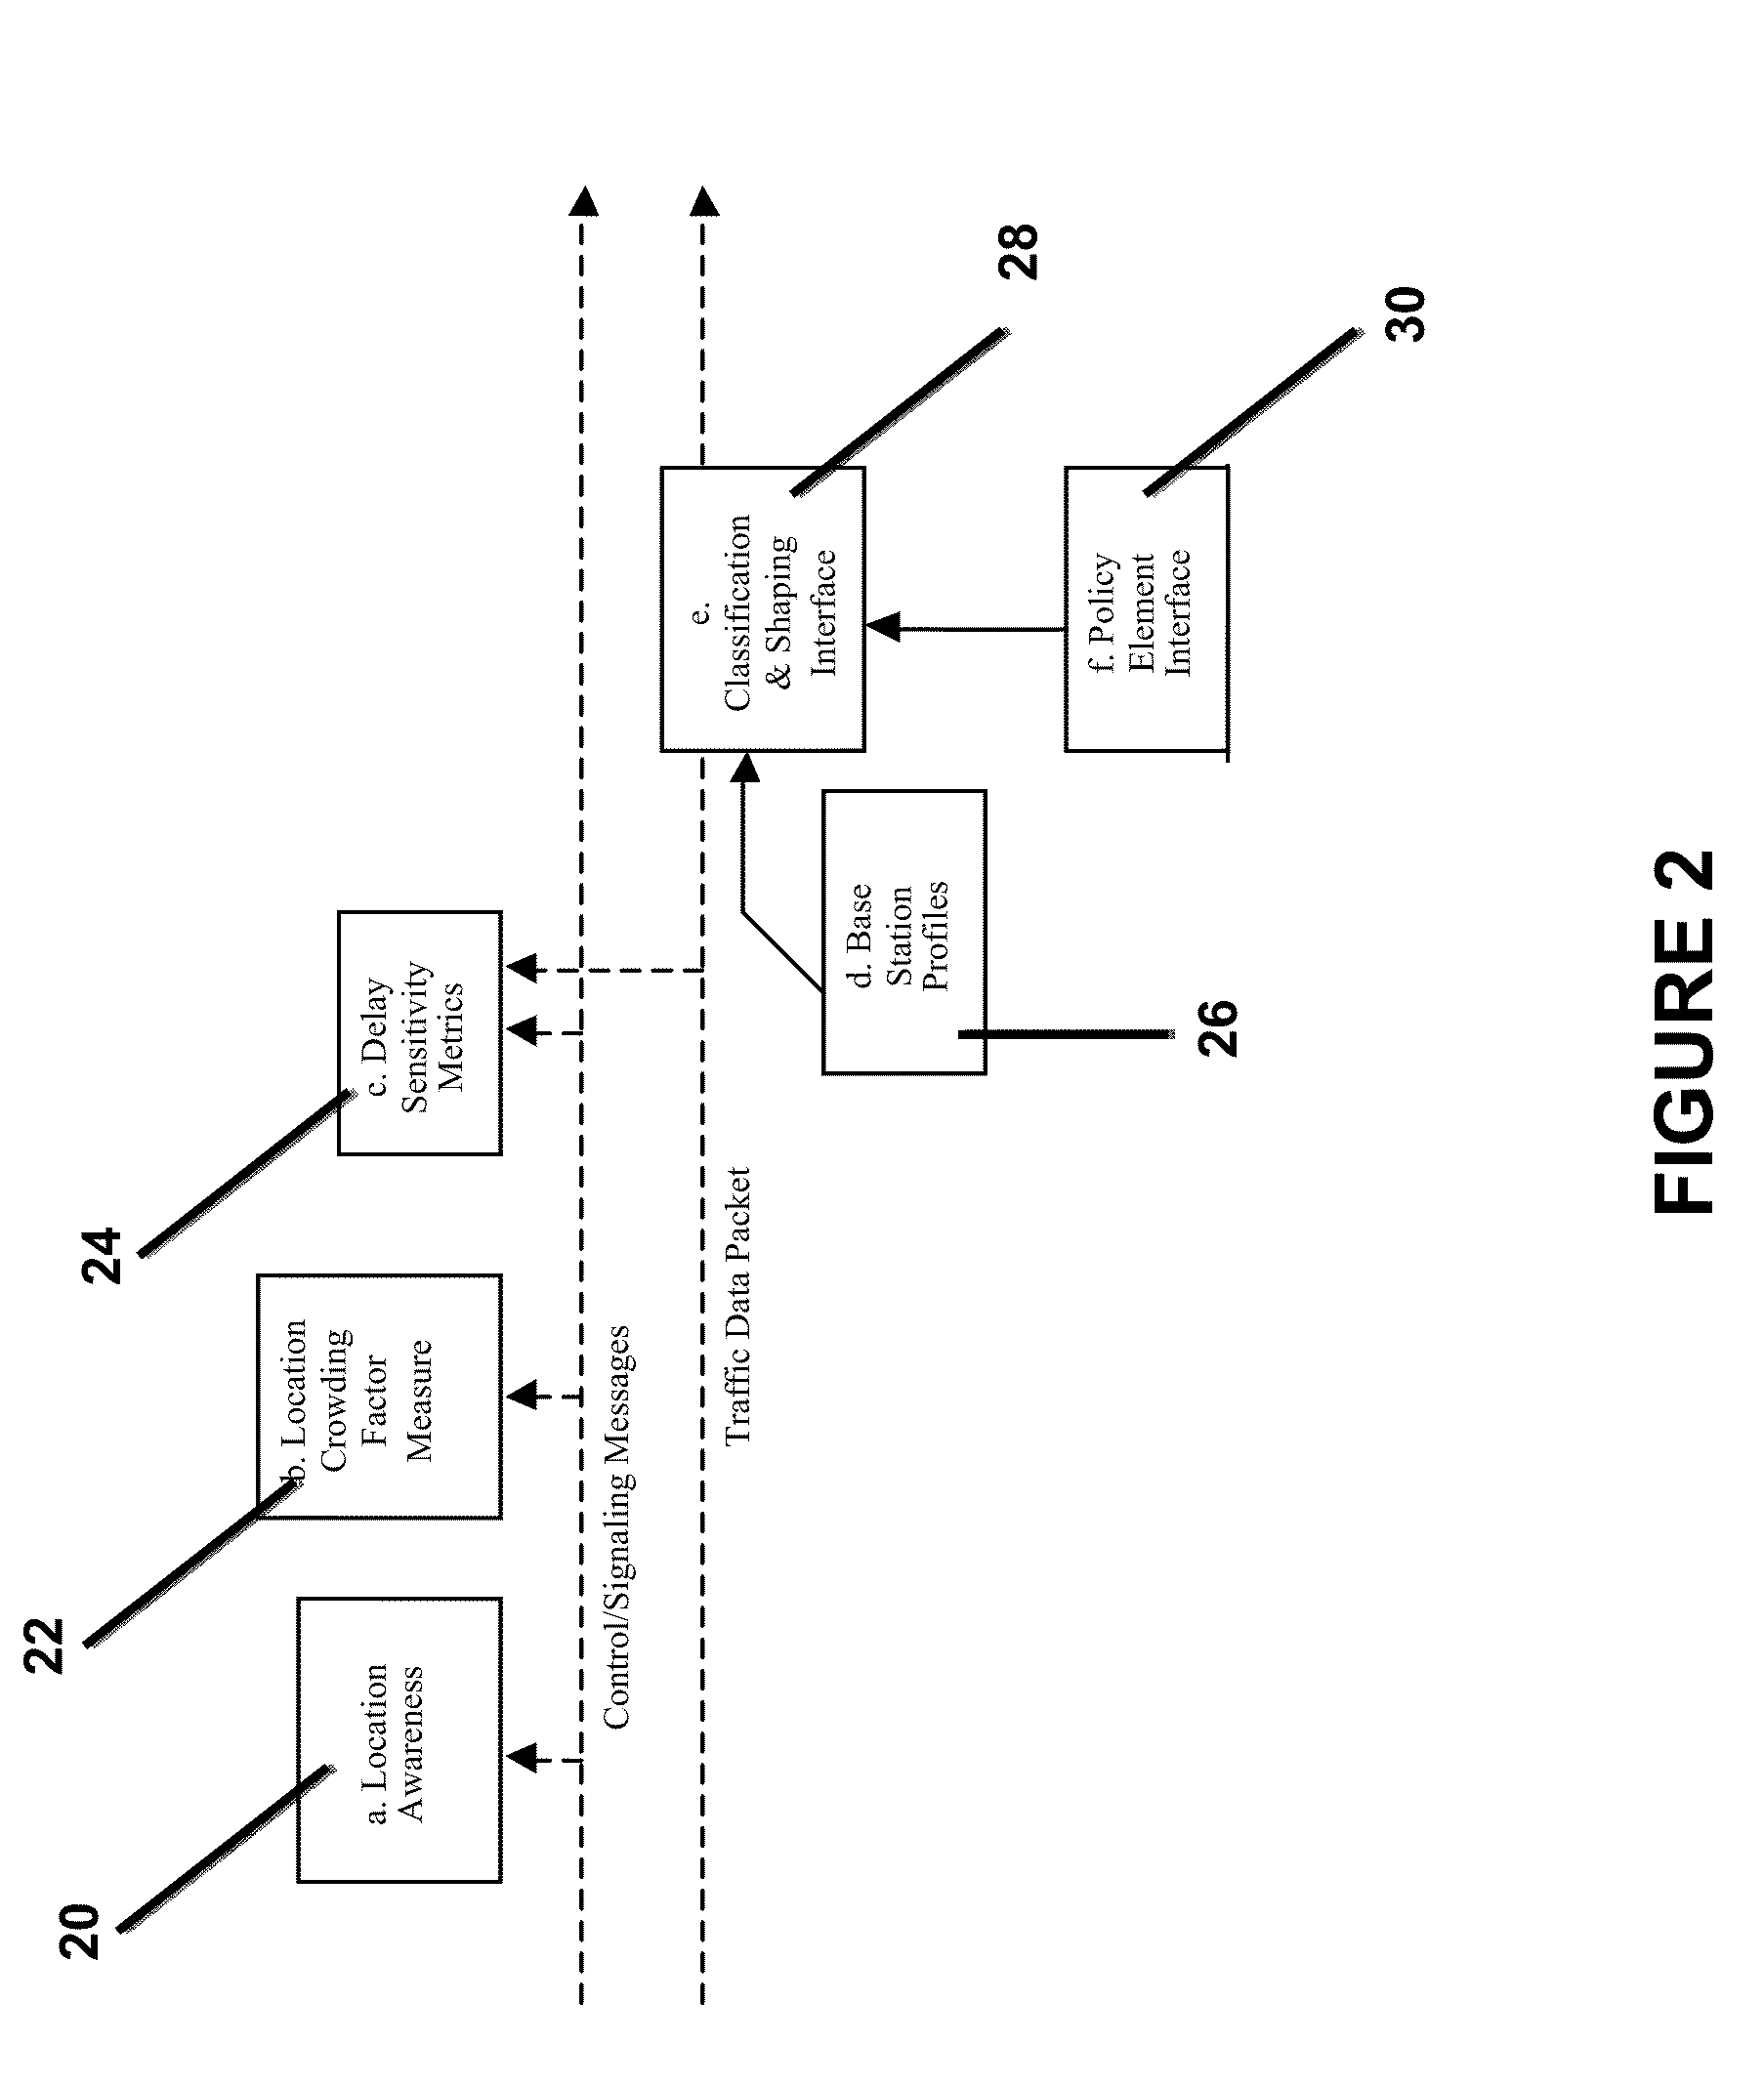 Radio access network load and condition aware traffic shaping control